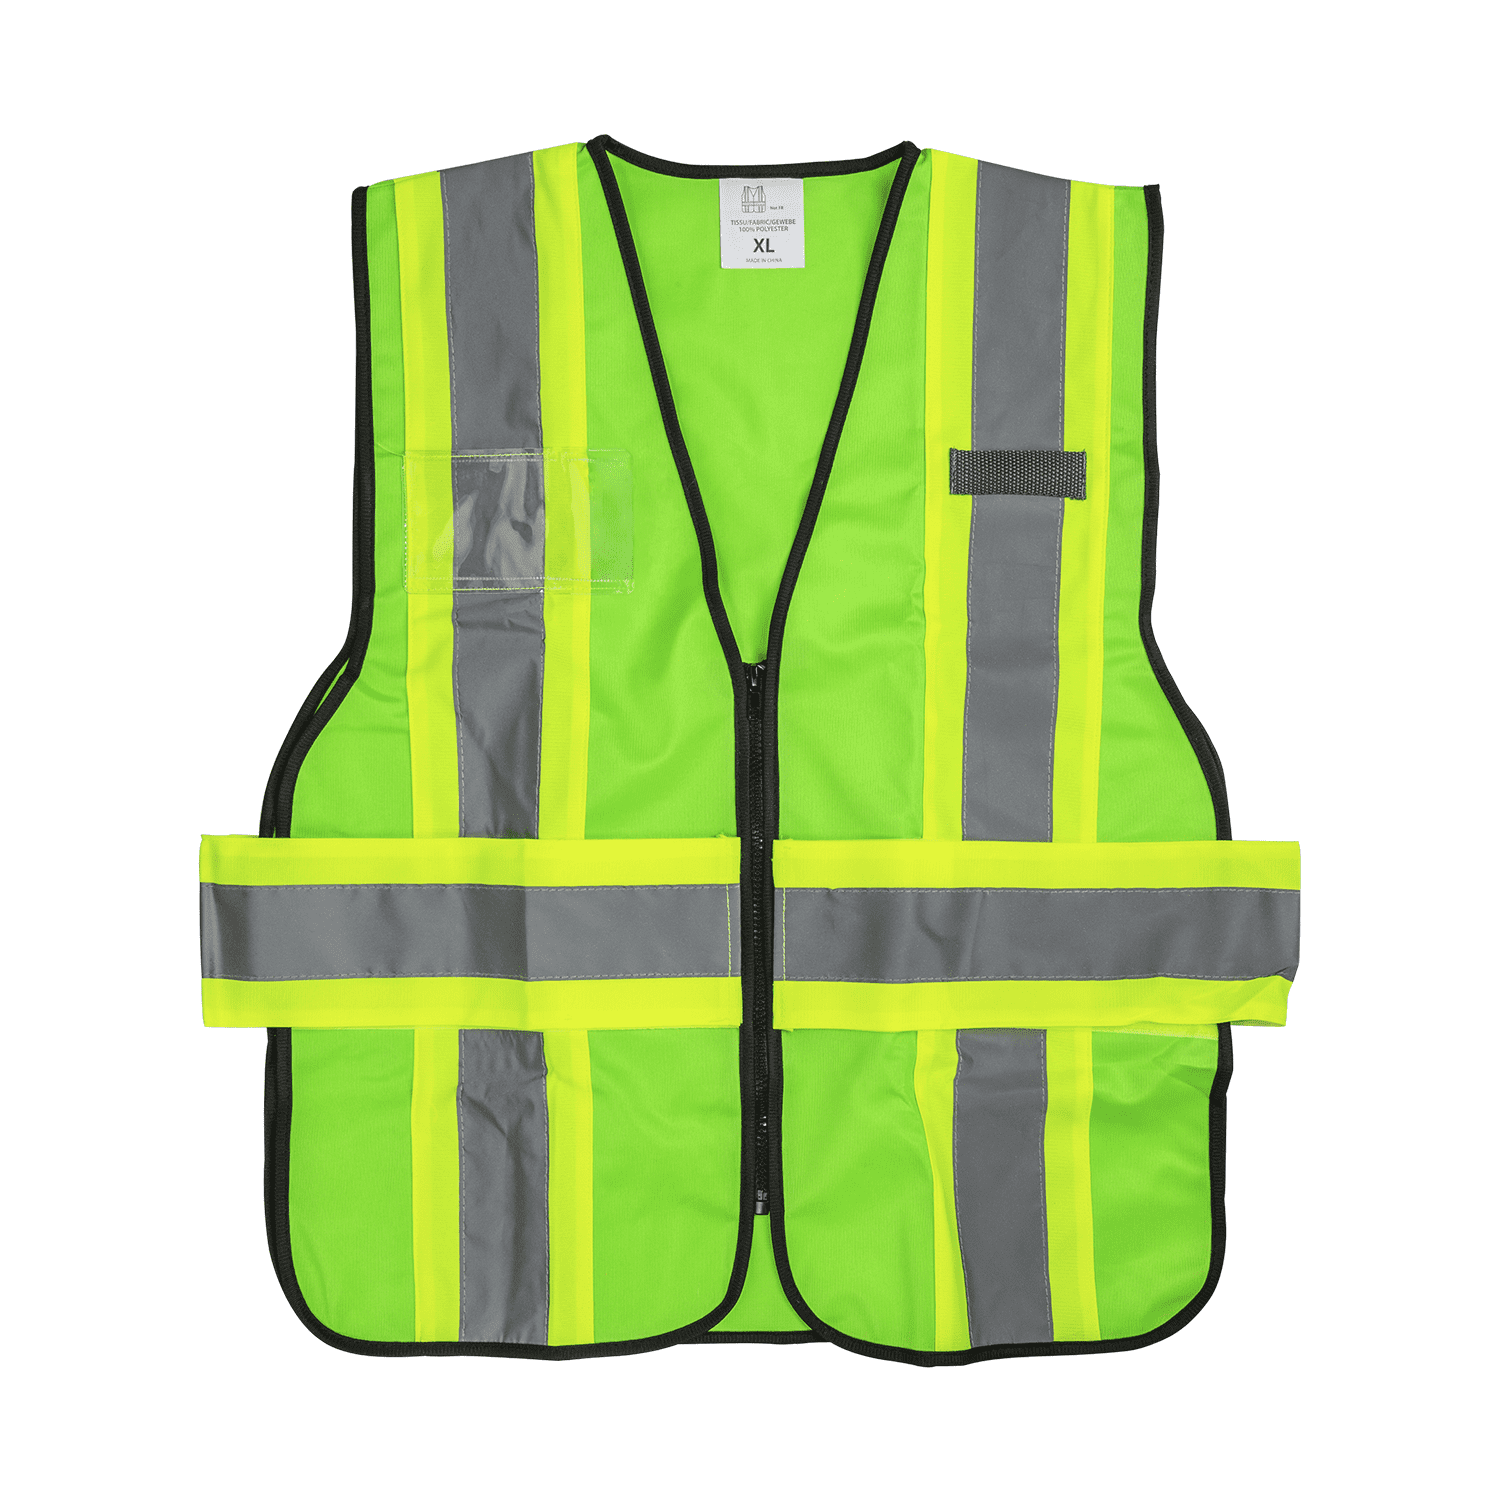 Karat High Visibility Reflective Safety Vest with Velcro Fastening  (Yellow), X-Large - 1 pc